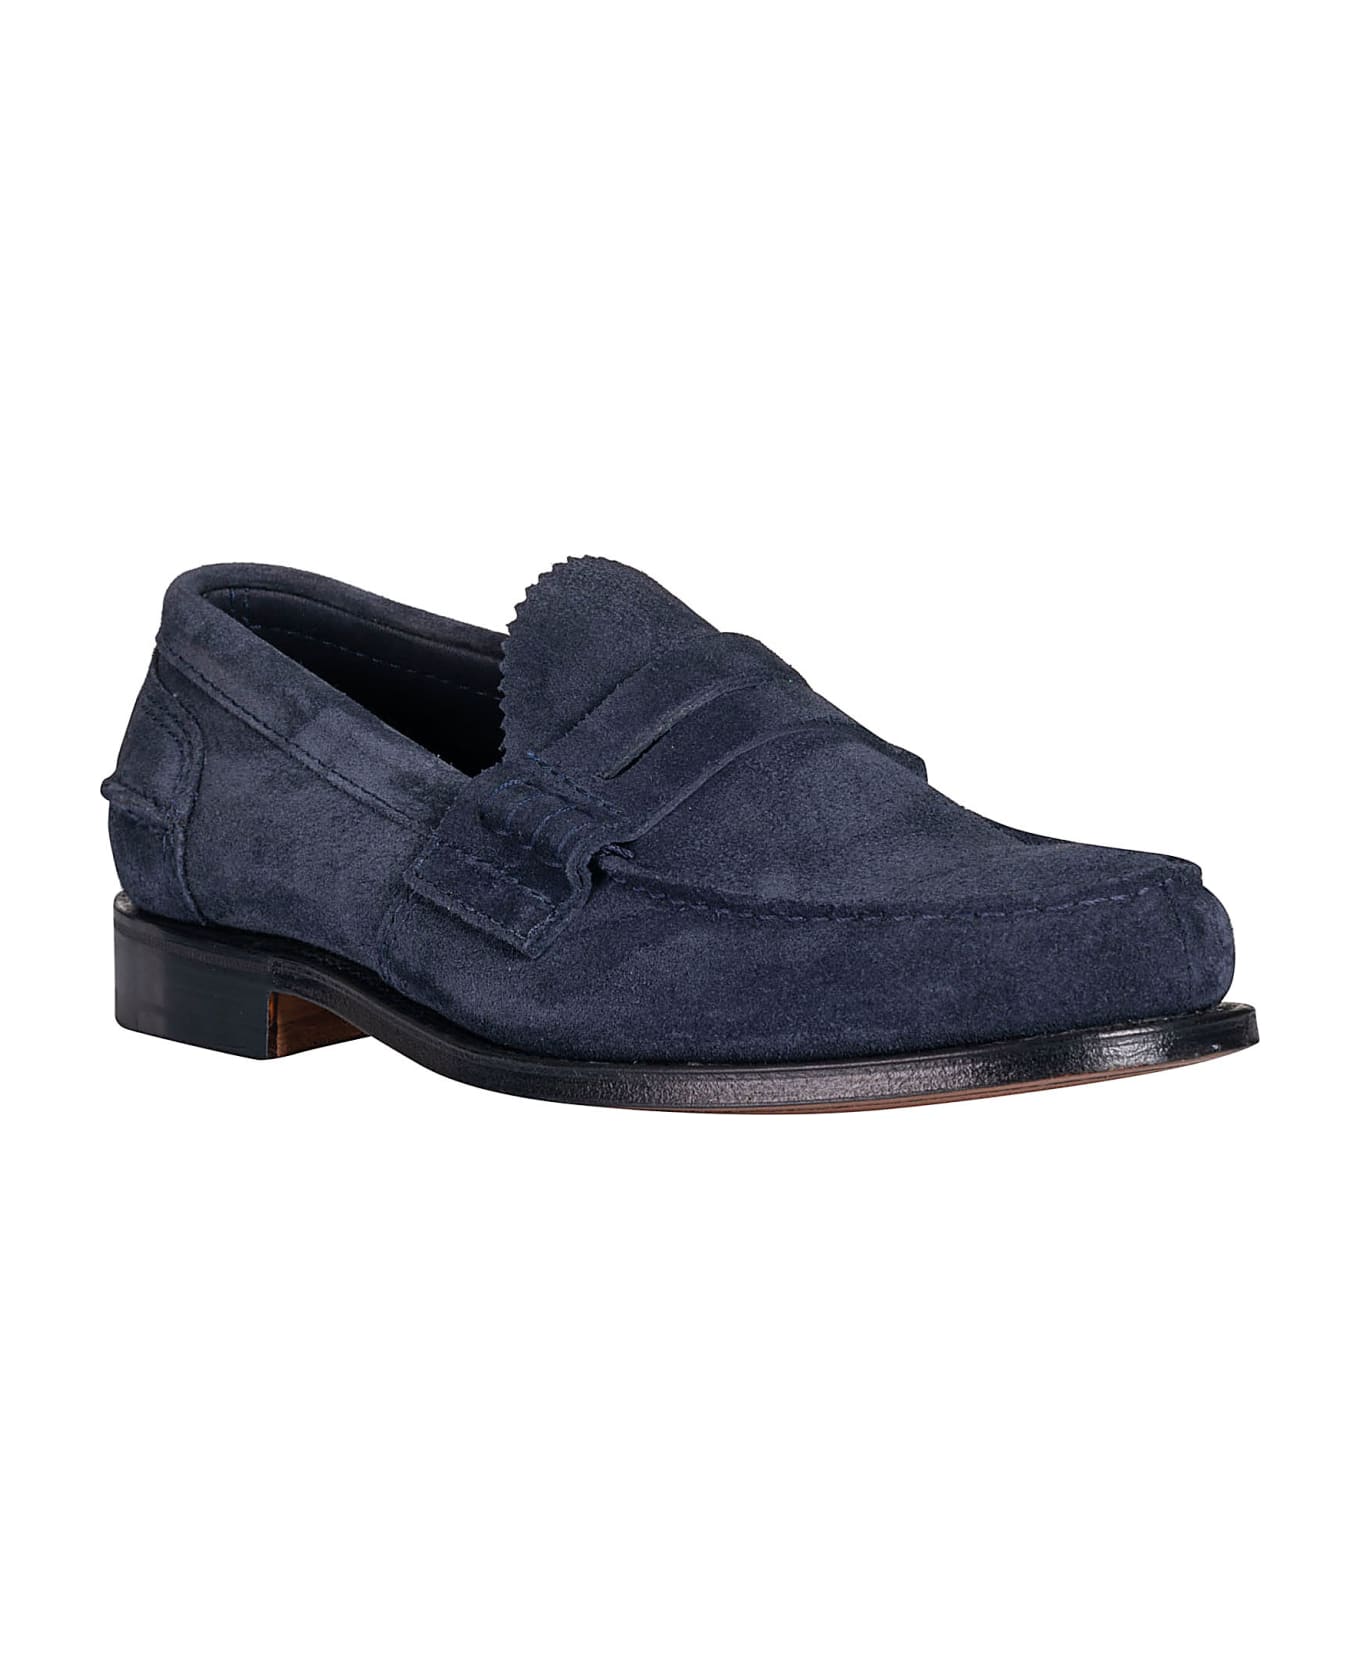 Church's Classic Loafers - Blue ローファー＆デッキシューズ